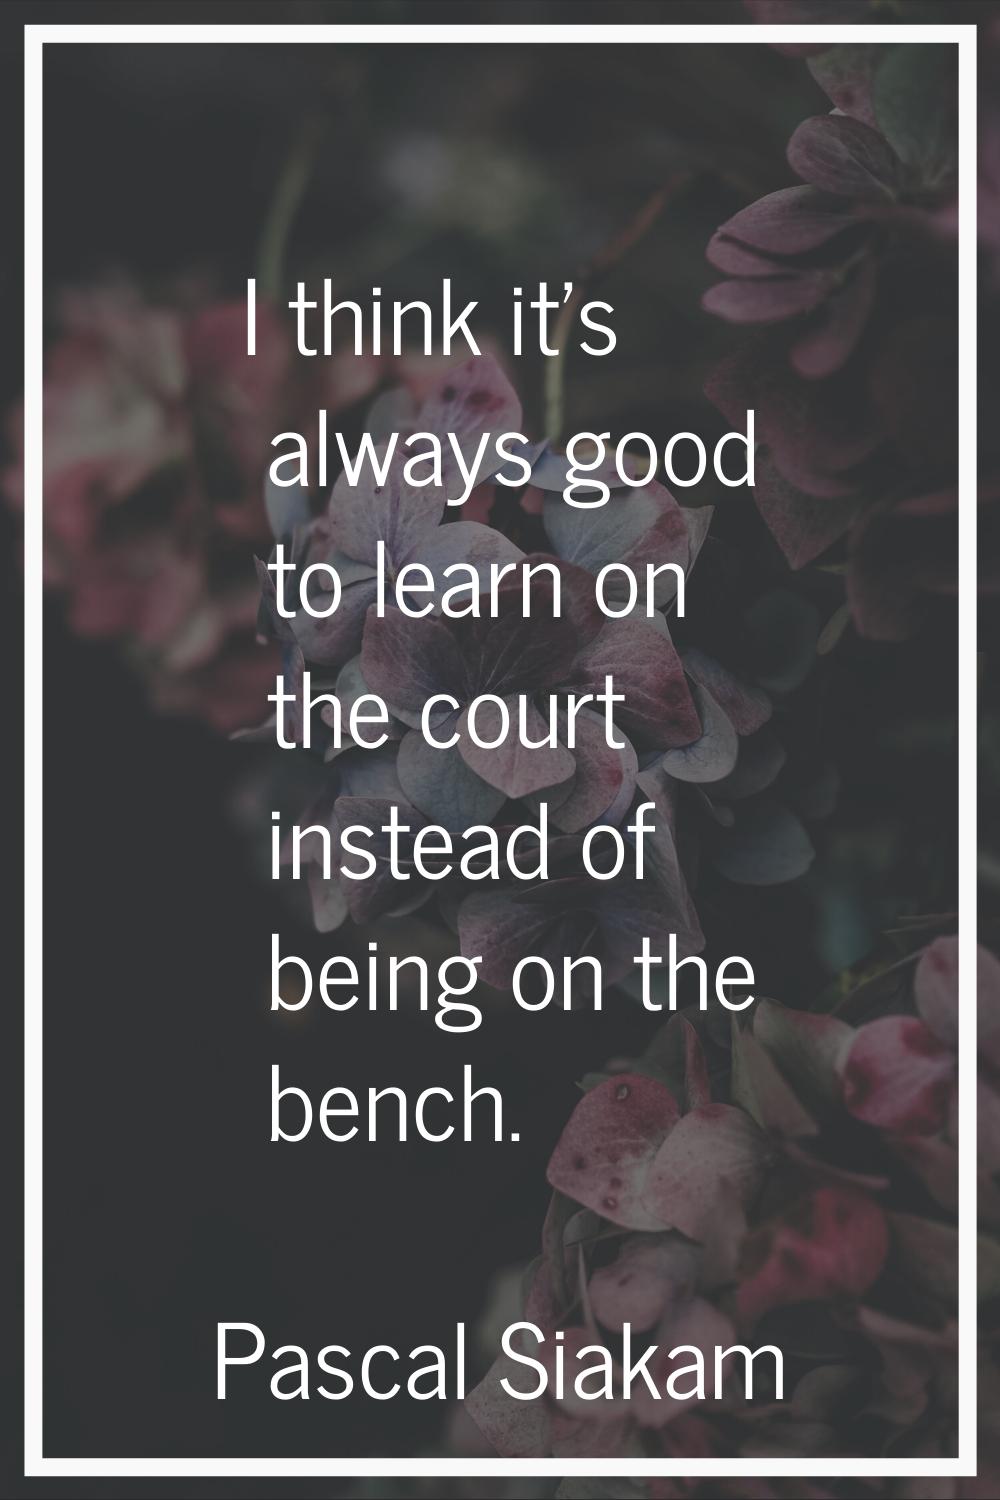 I think it's always good to learn on the court instead of being on the bench.